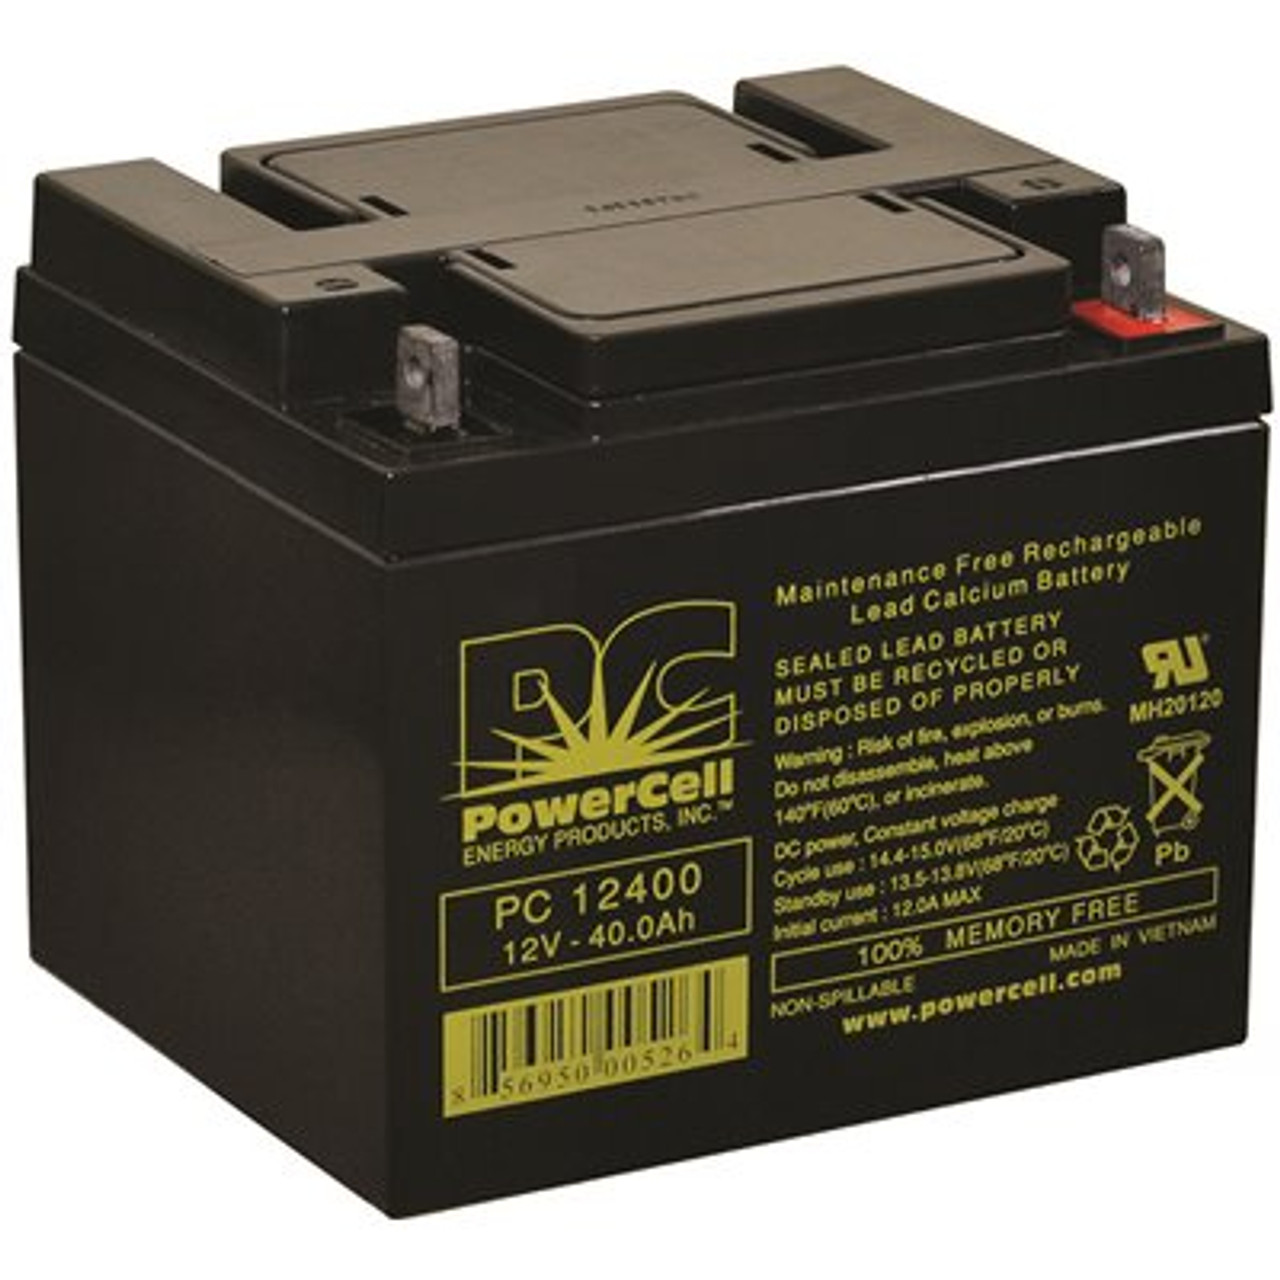 12-Volt 40.0 Ah, Nut and Bolt Terminal, Sealed Lead-Acid, AGM, Maintenance Free, Rechargeable, Non-spillable, Battery